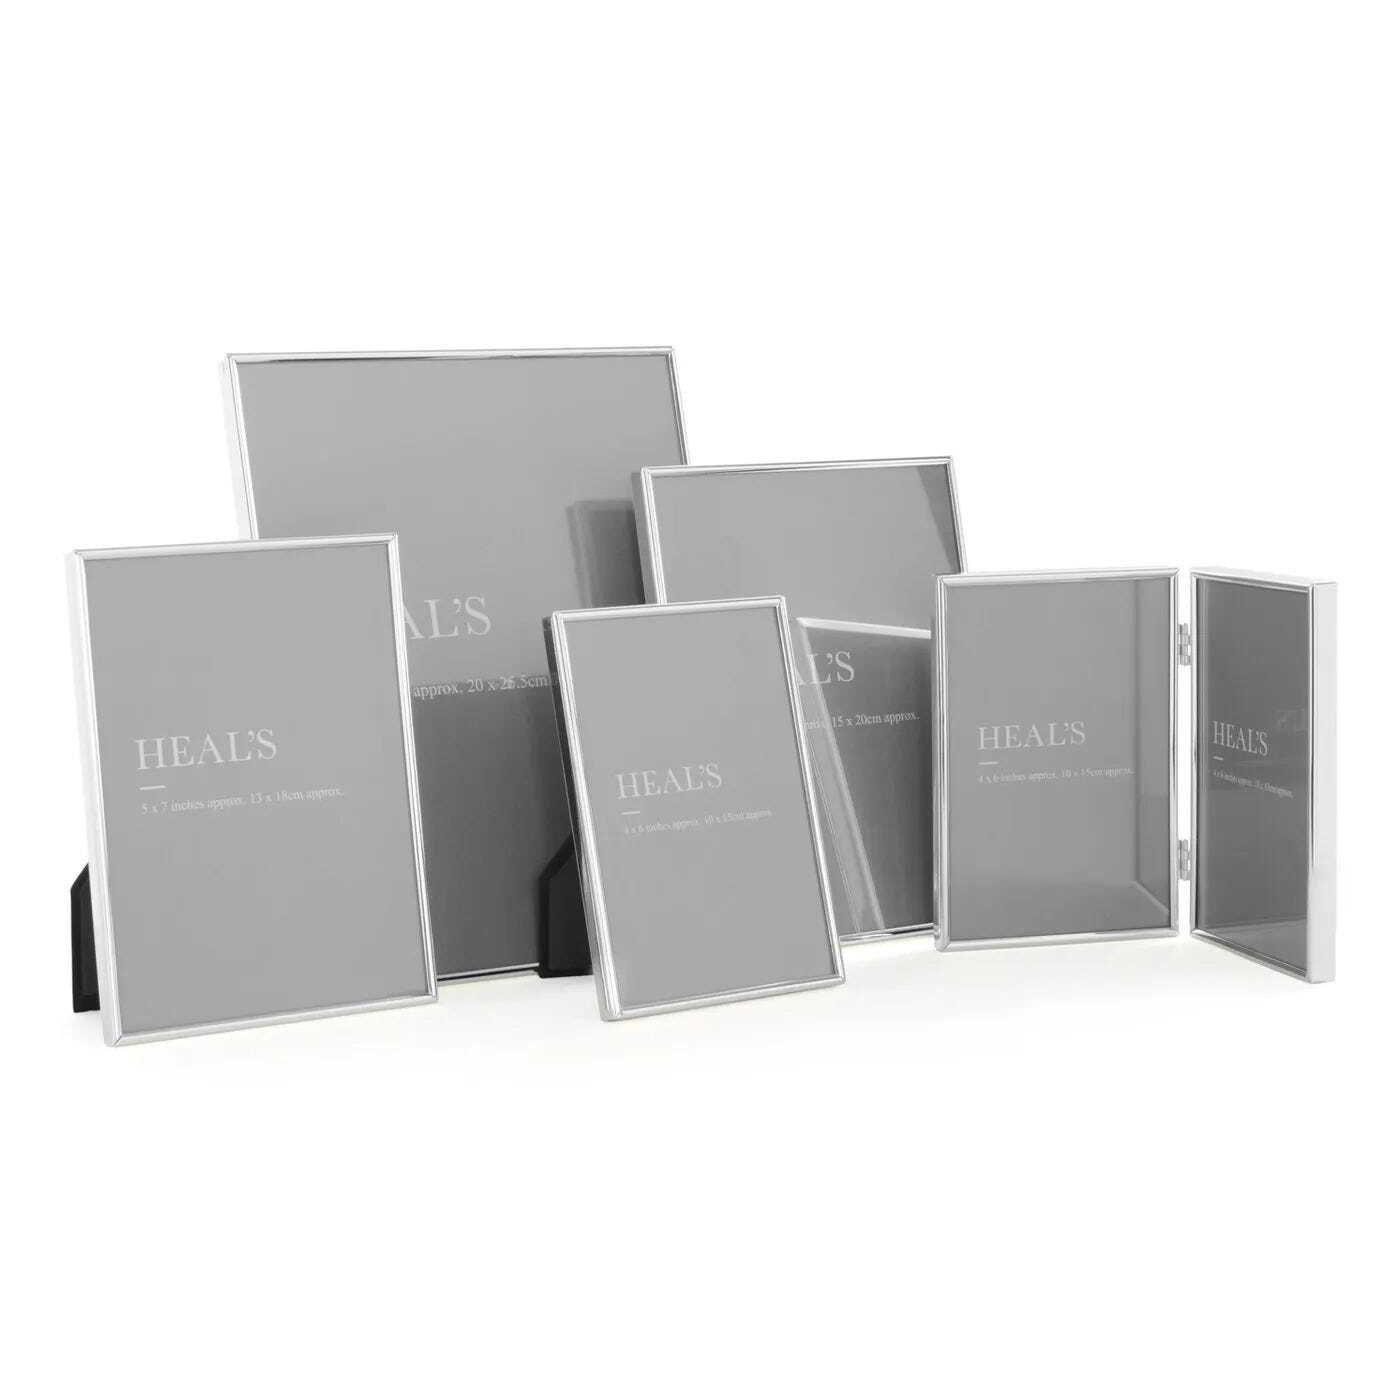 Heal's Simple Silver Plated Medium Photo Frame